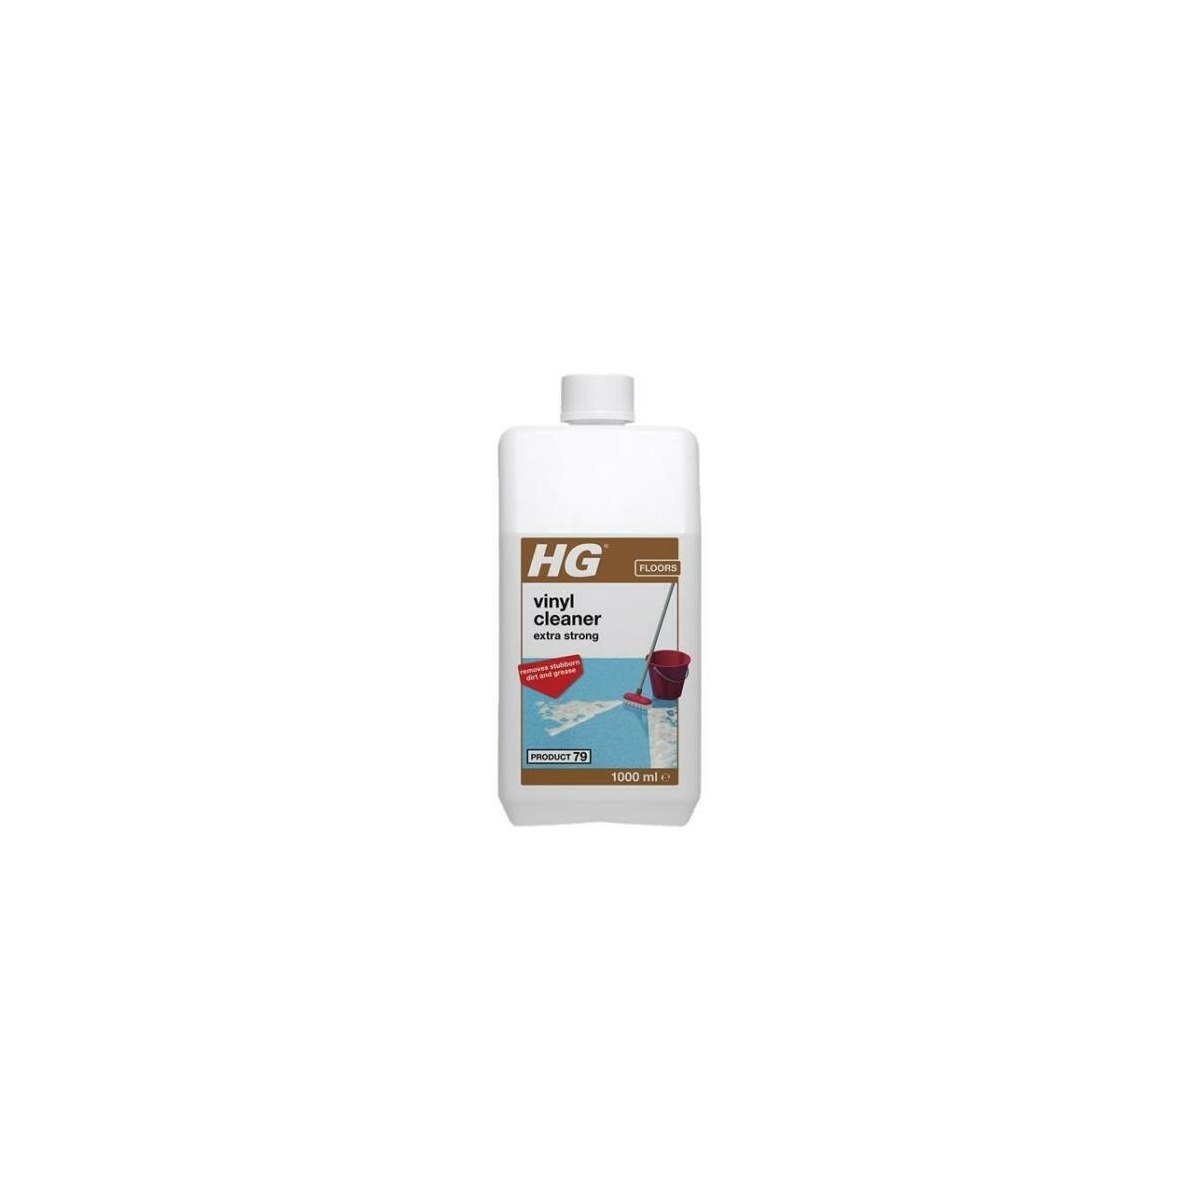 HG Vinyl Cleaner Extra Strong 1 Litre Product 79